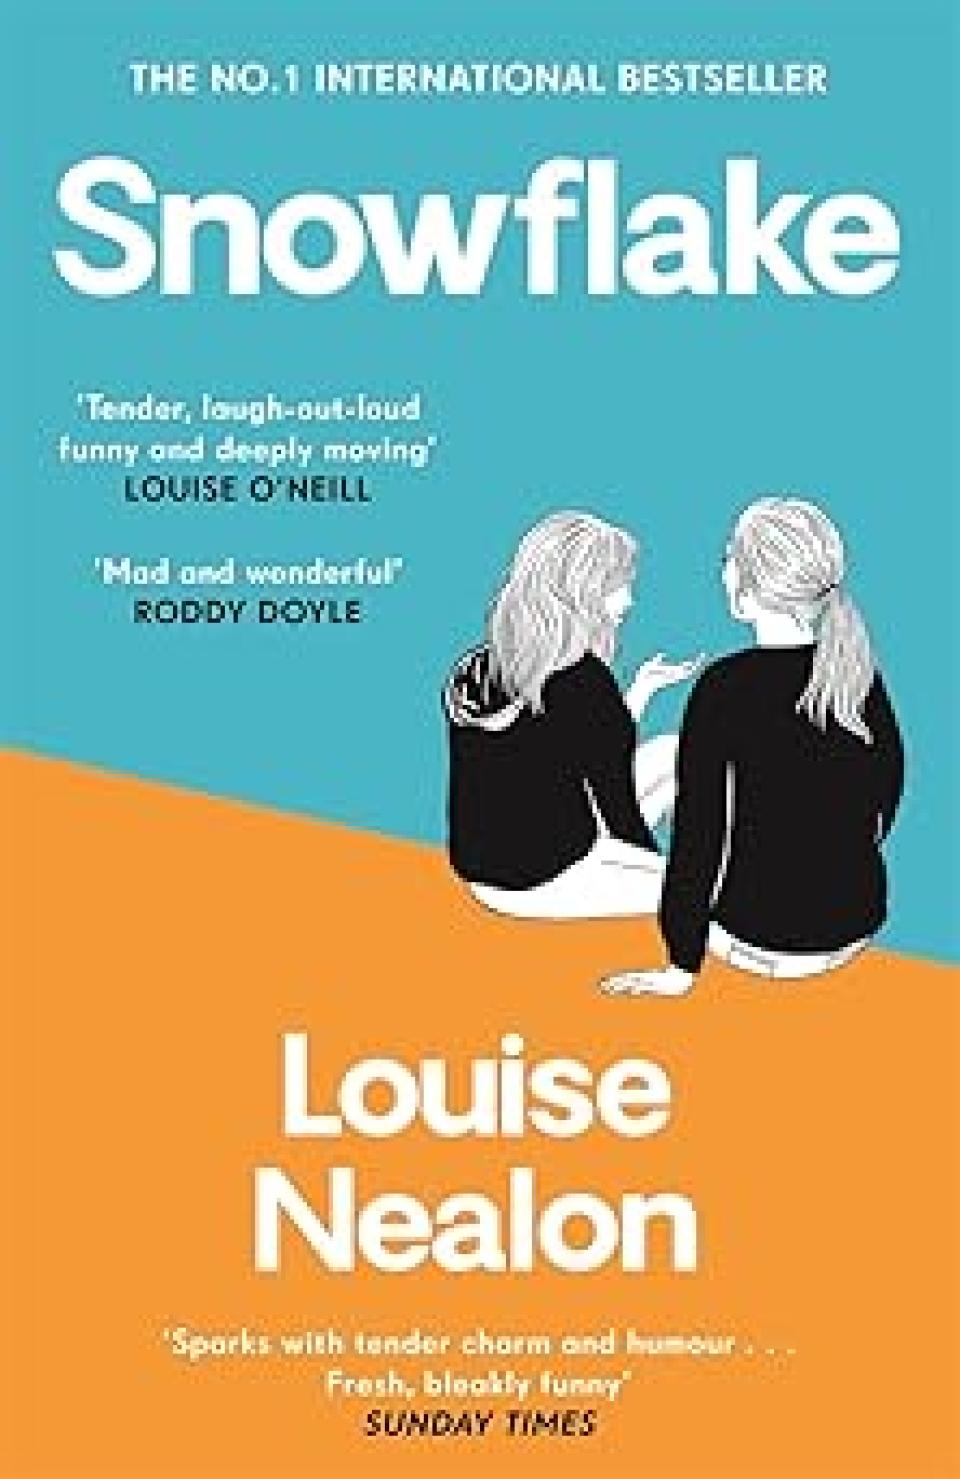 Book cover of Snowflake by Louise Nealon. Shows two girls sitting and talking.